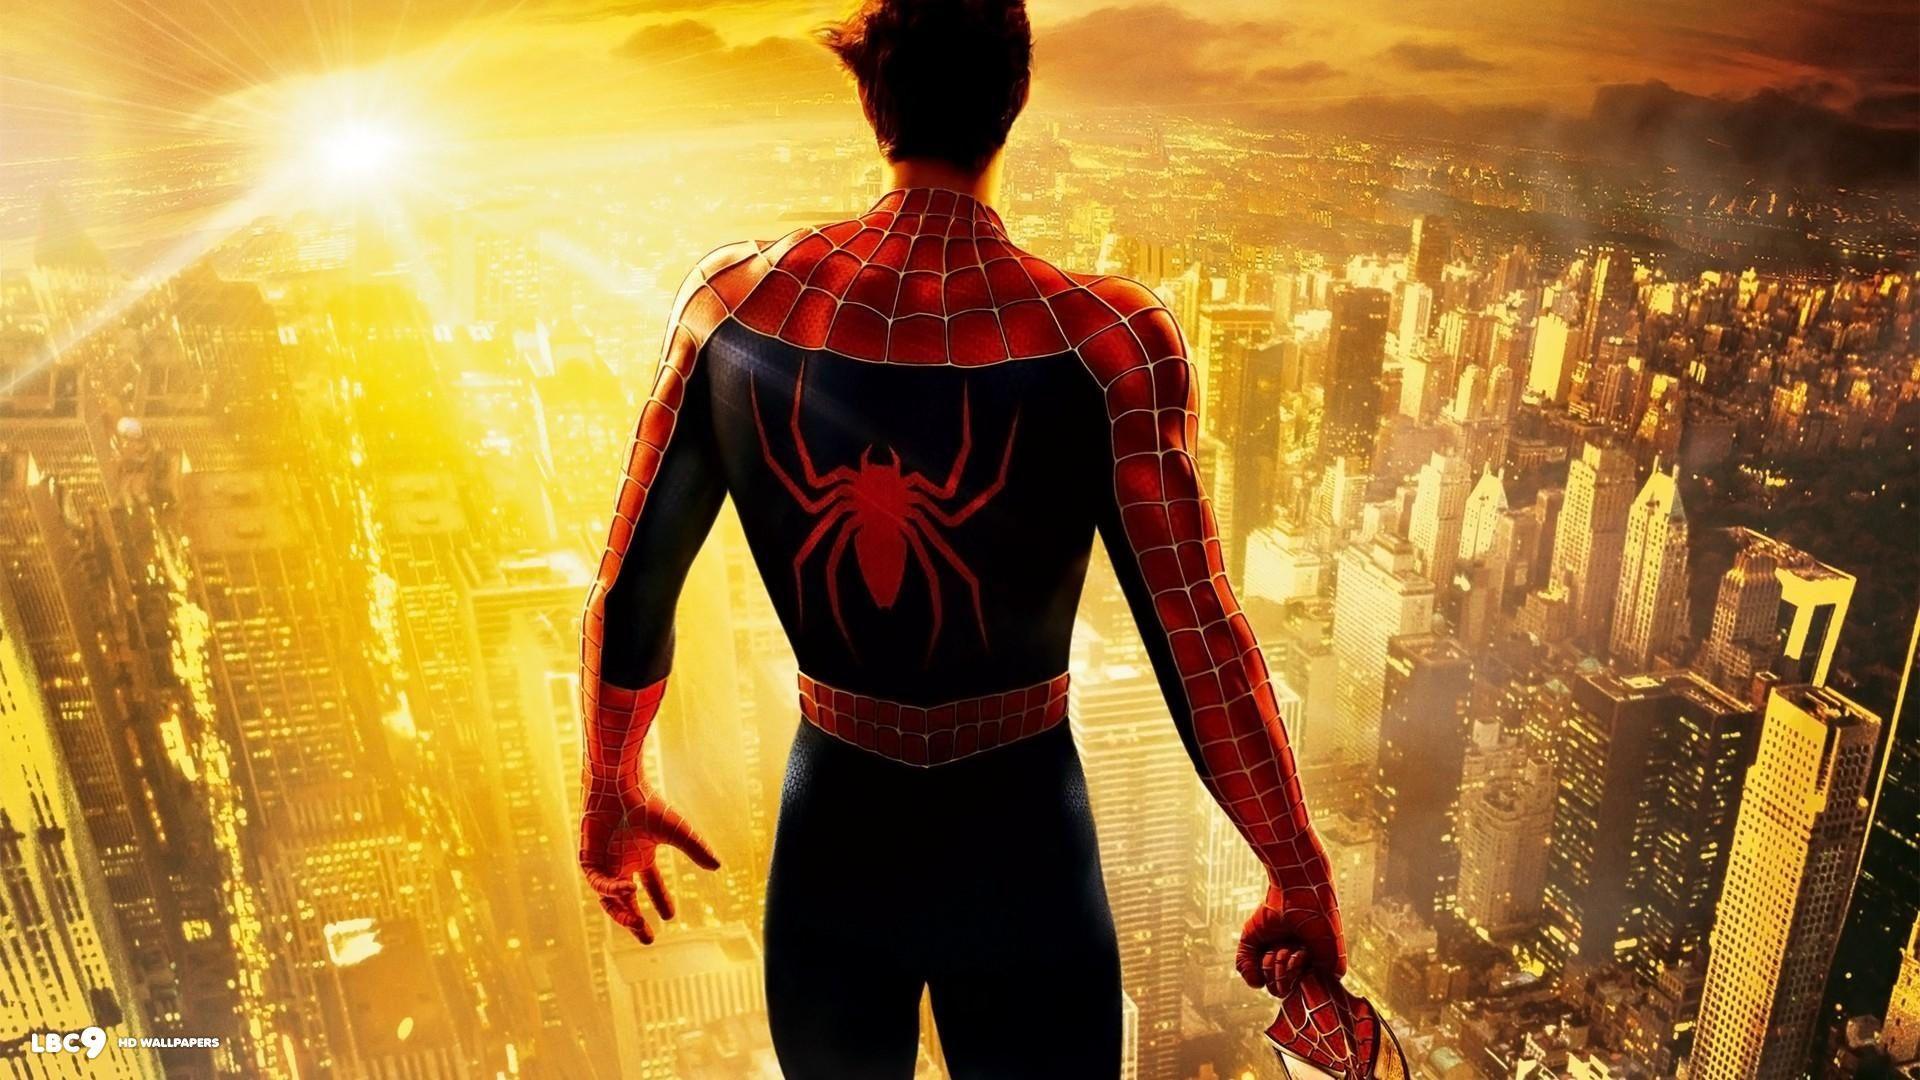 Spider Man 2: The Pinnacle Of Superhero Films. The Young Folks